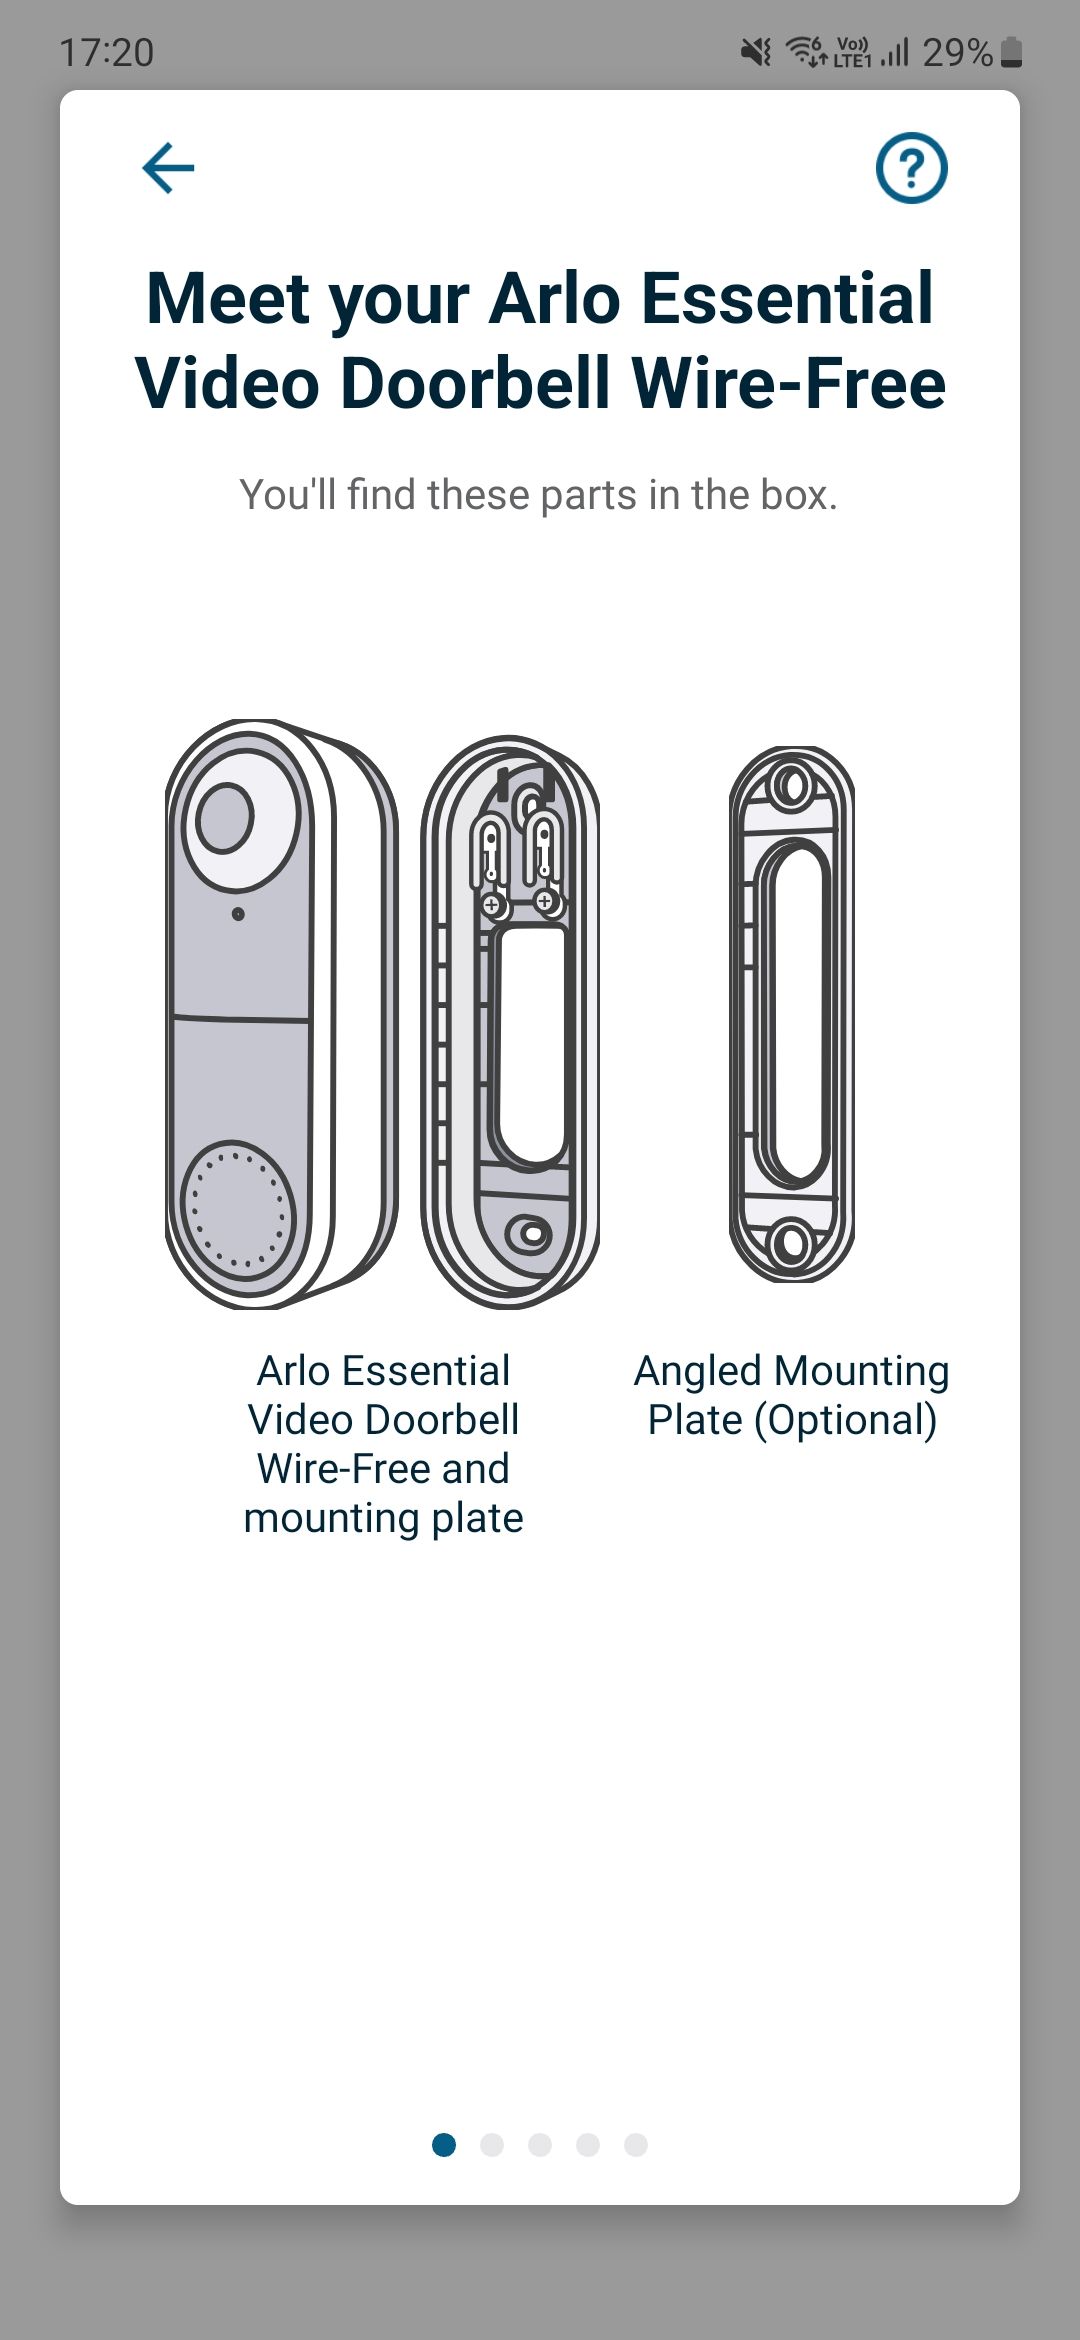 A screenshot of the Arlo Essential Video Doorbell mounting instructions